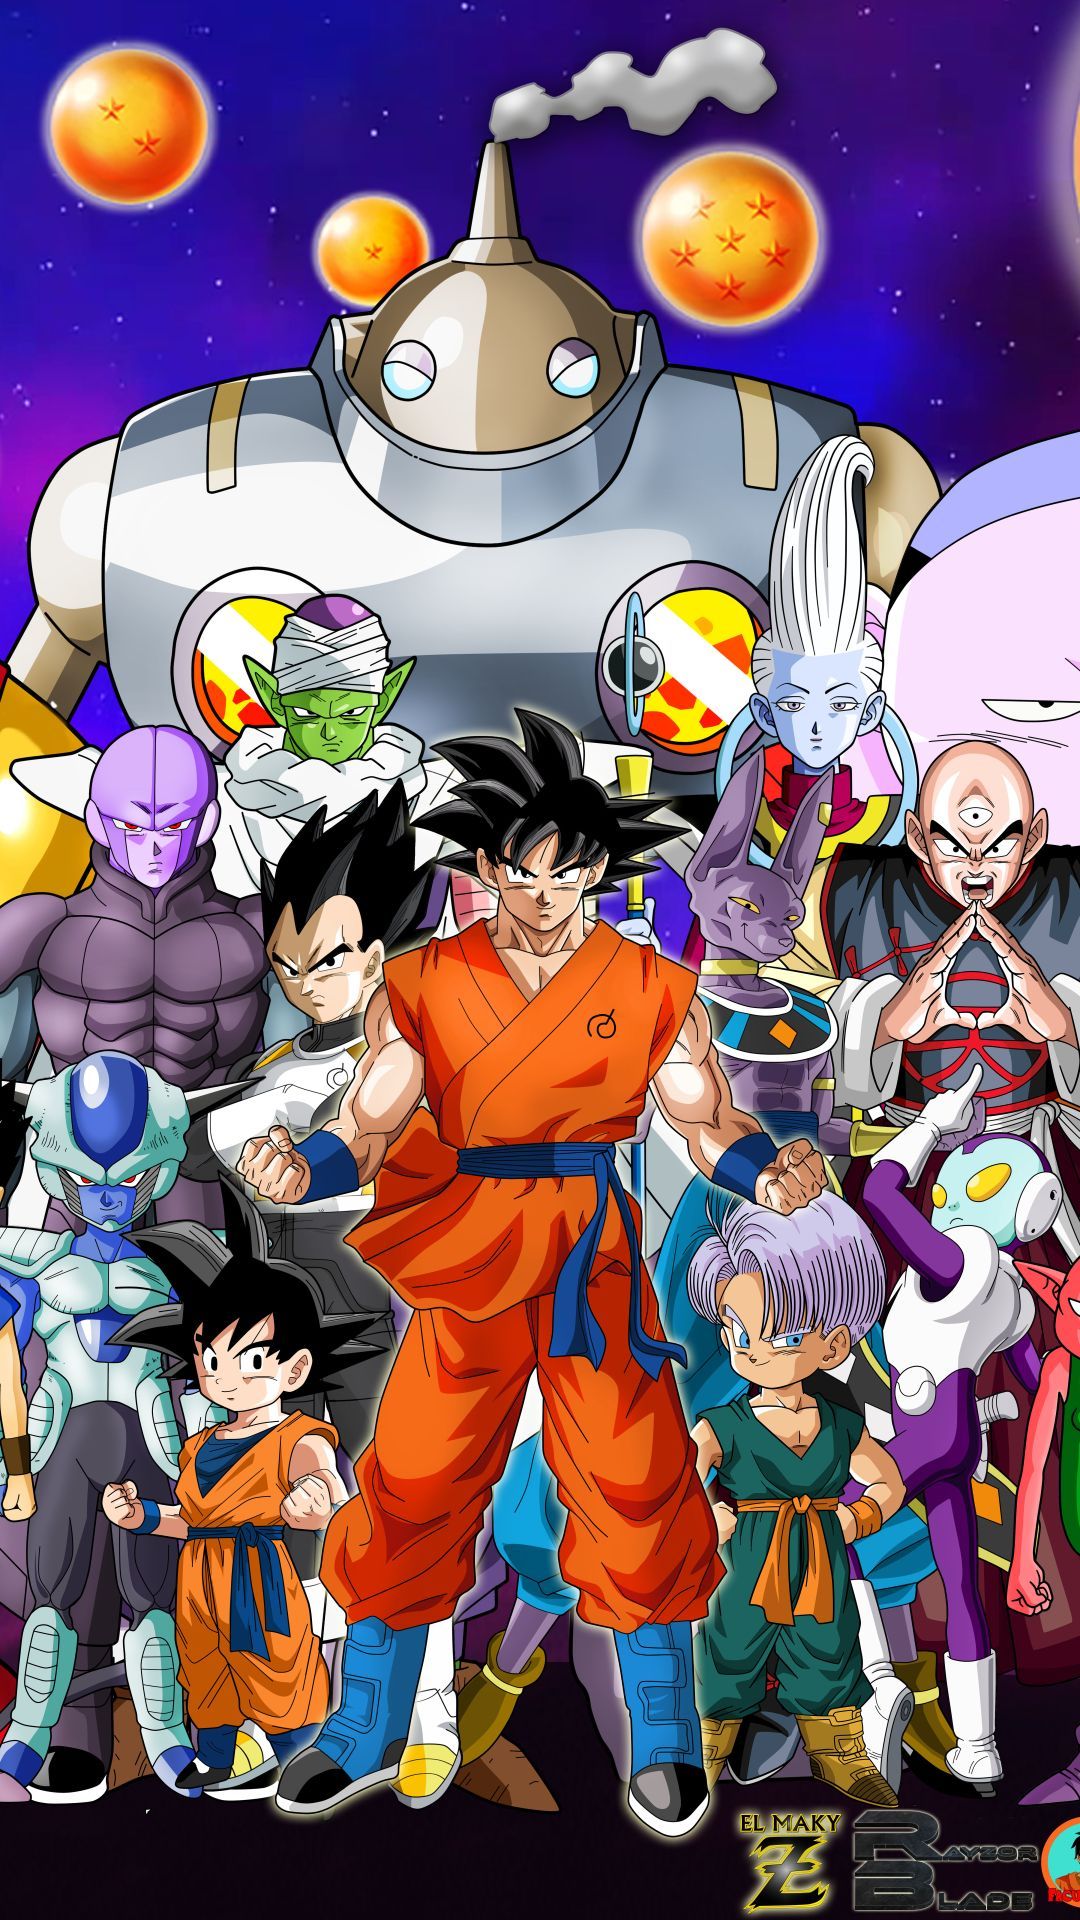  download Dragon Ball Z Wallpaper Hd Hupages Download Iphone 1080x1920